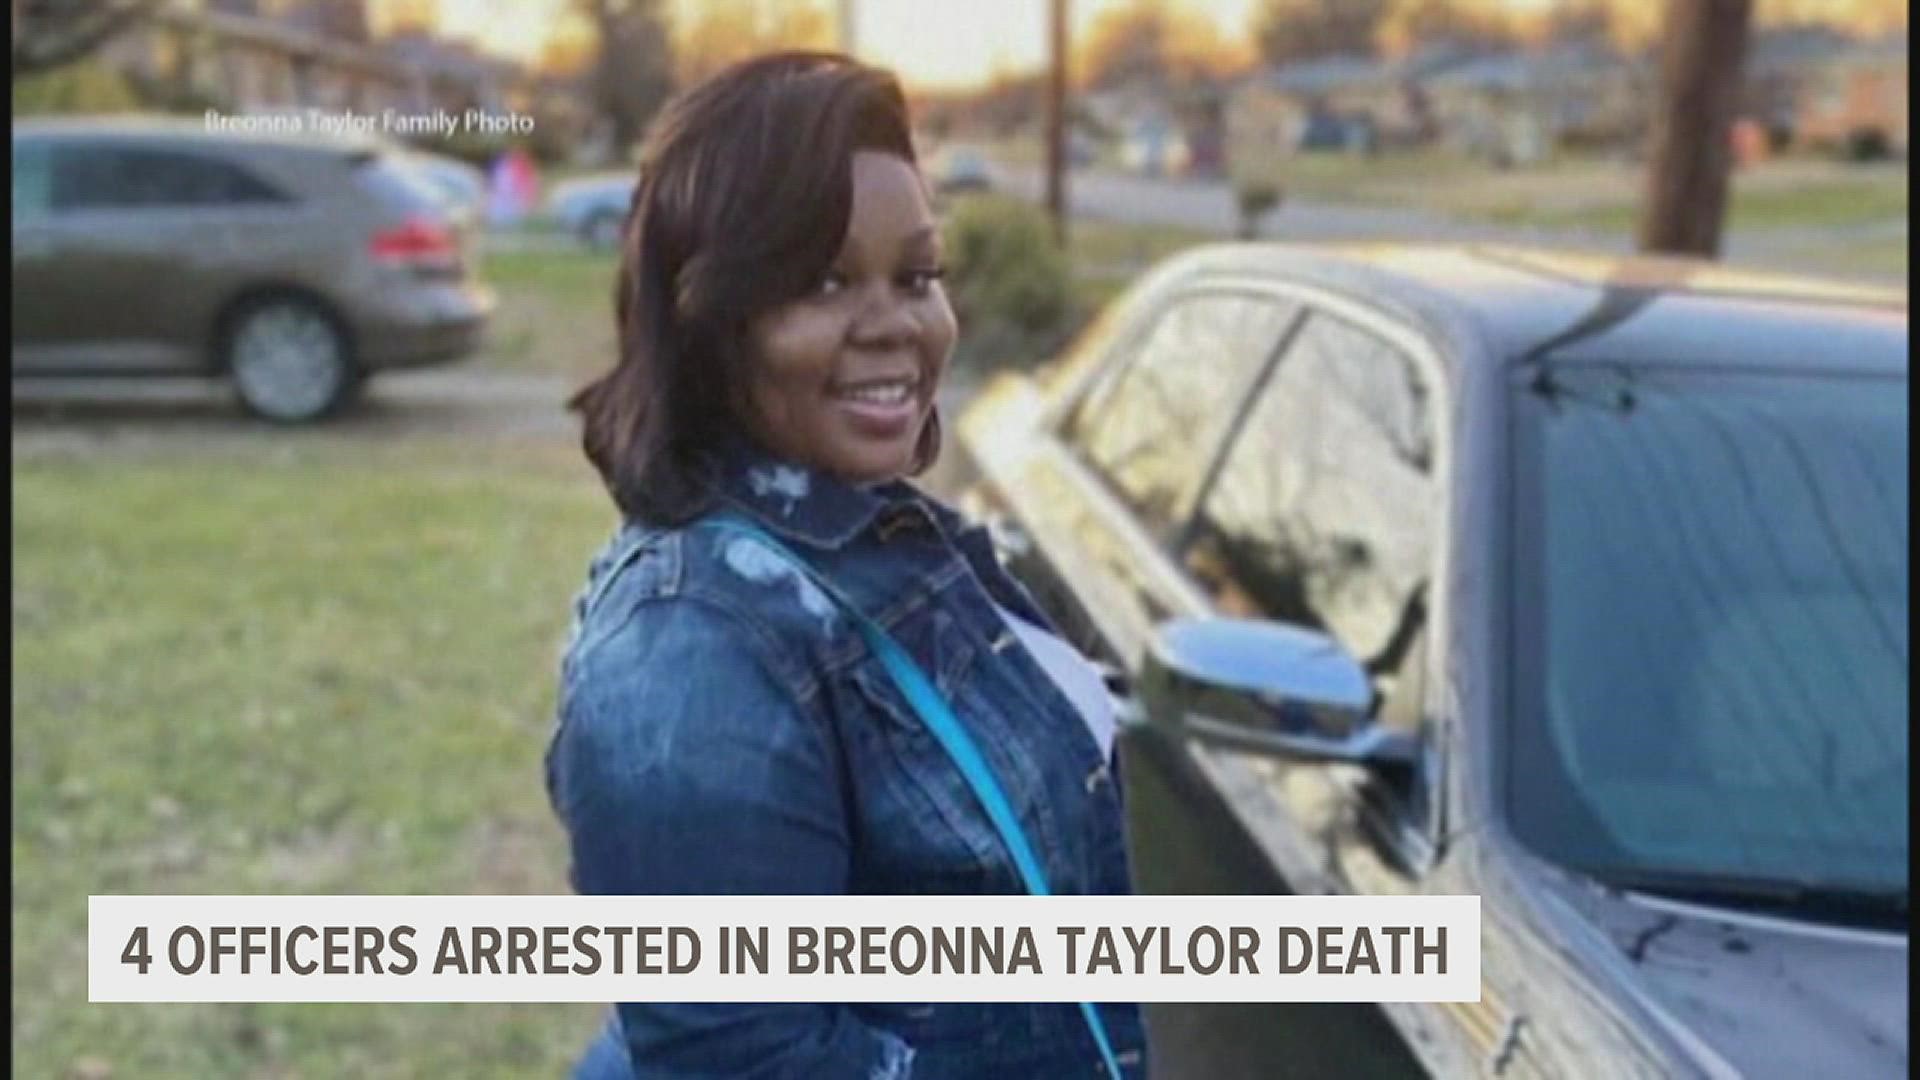 Charges include violating Breonna Taylor's civil rights, unlawful conspiracies, unconstitutional use of force, and obstruction offenses.